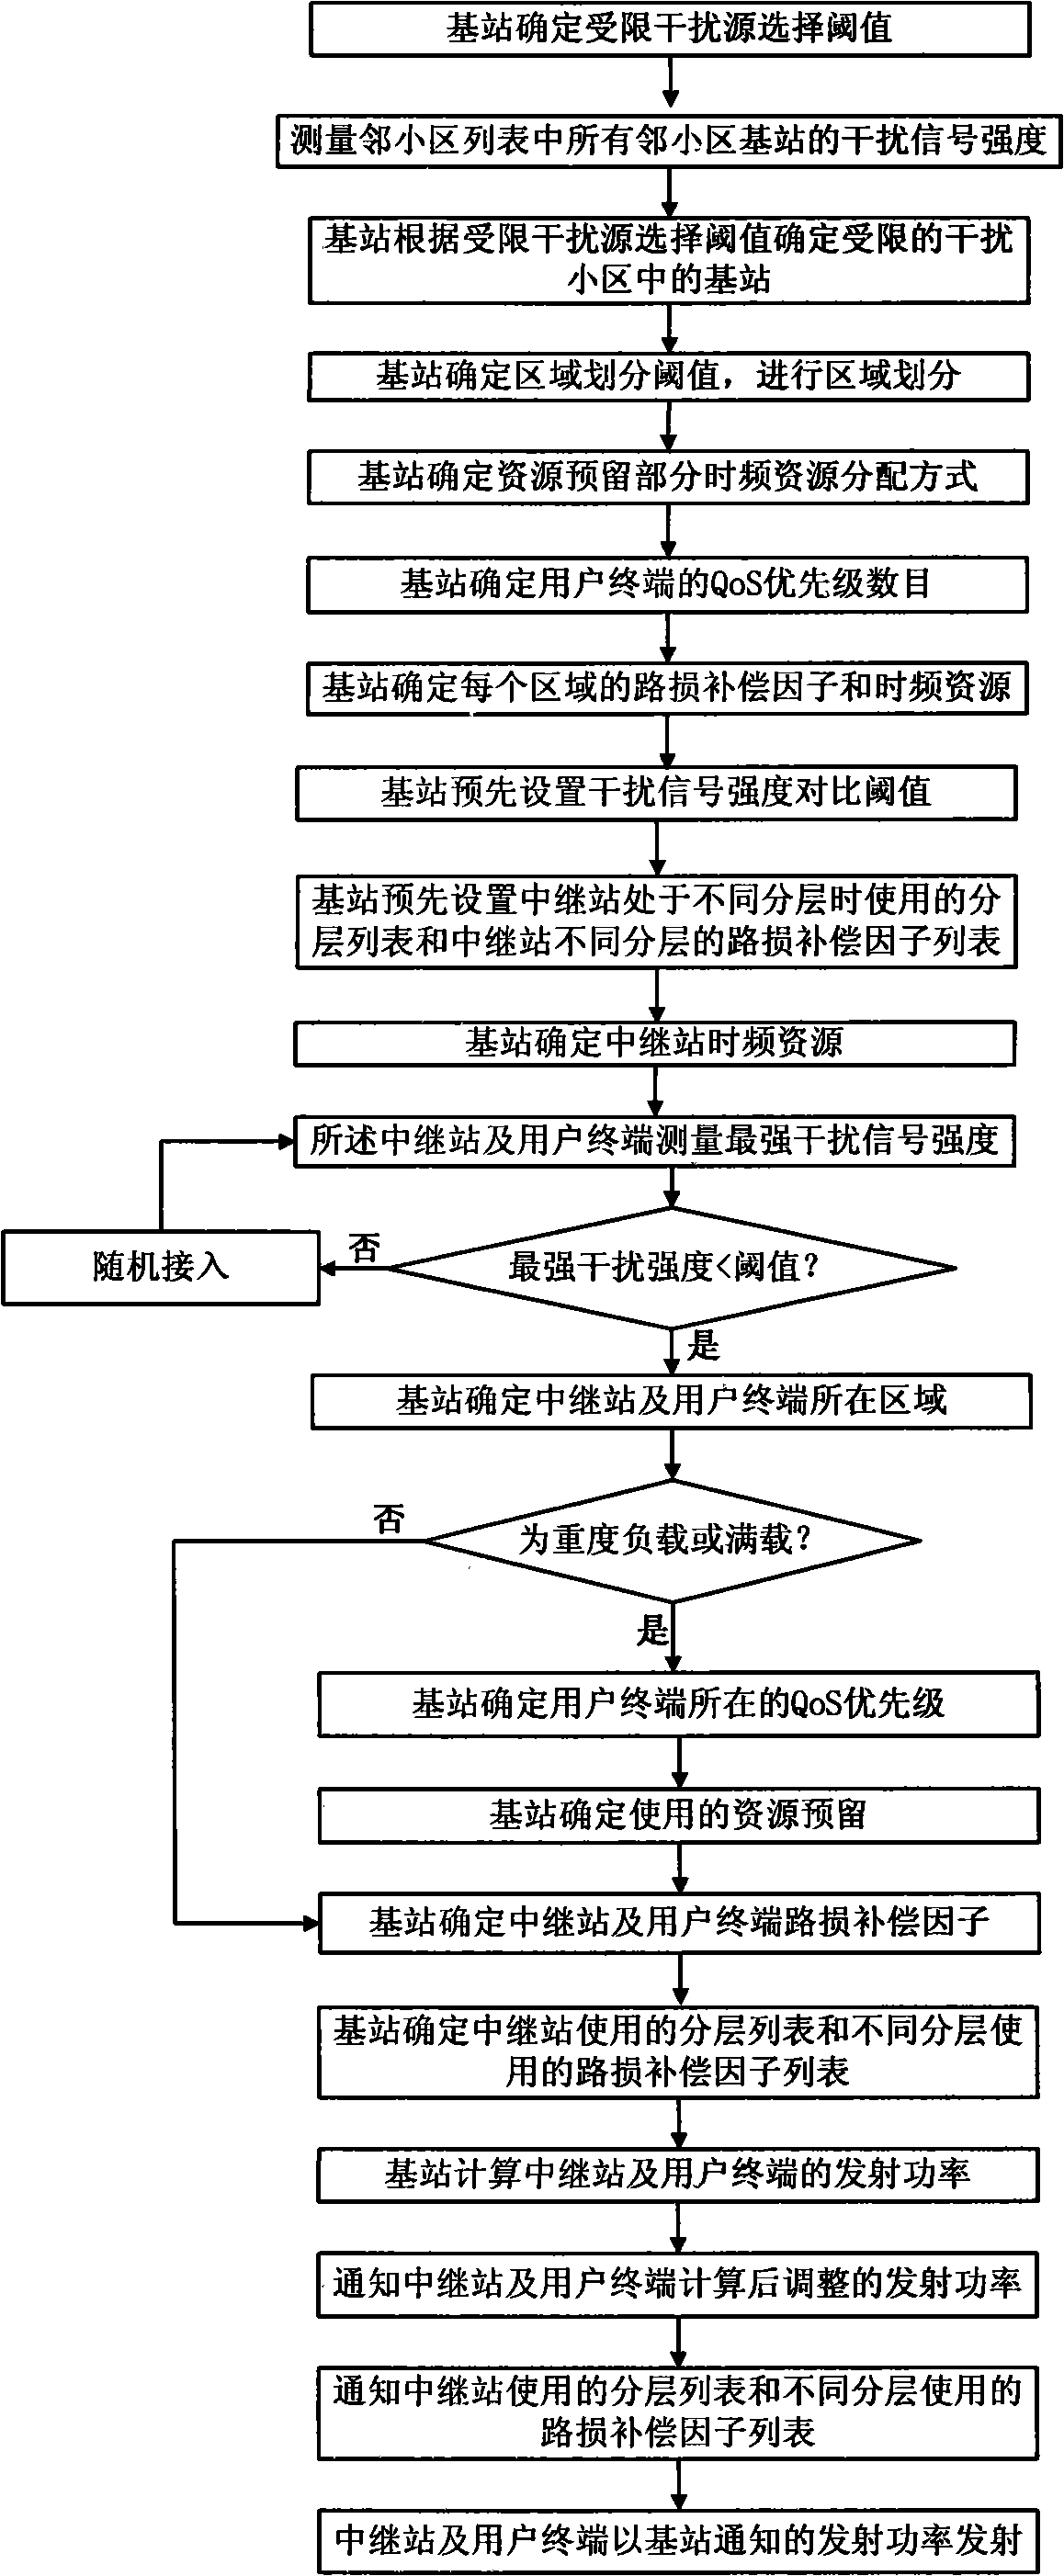 Method for coordinating interference between districts of relay wireless communication network